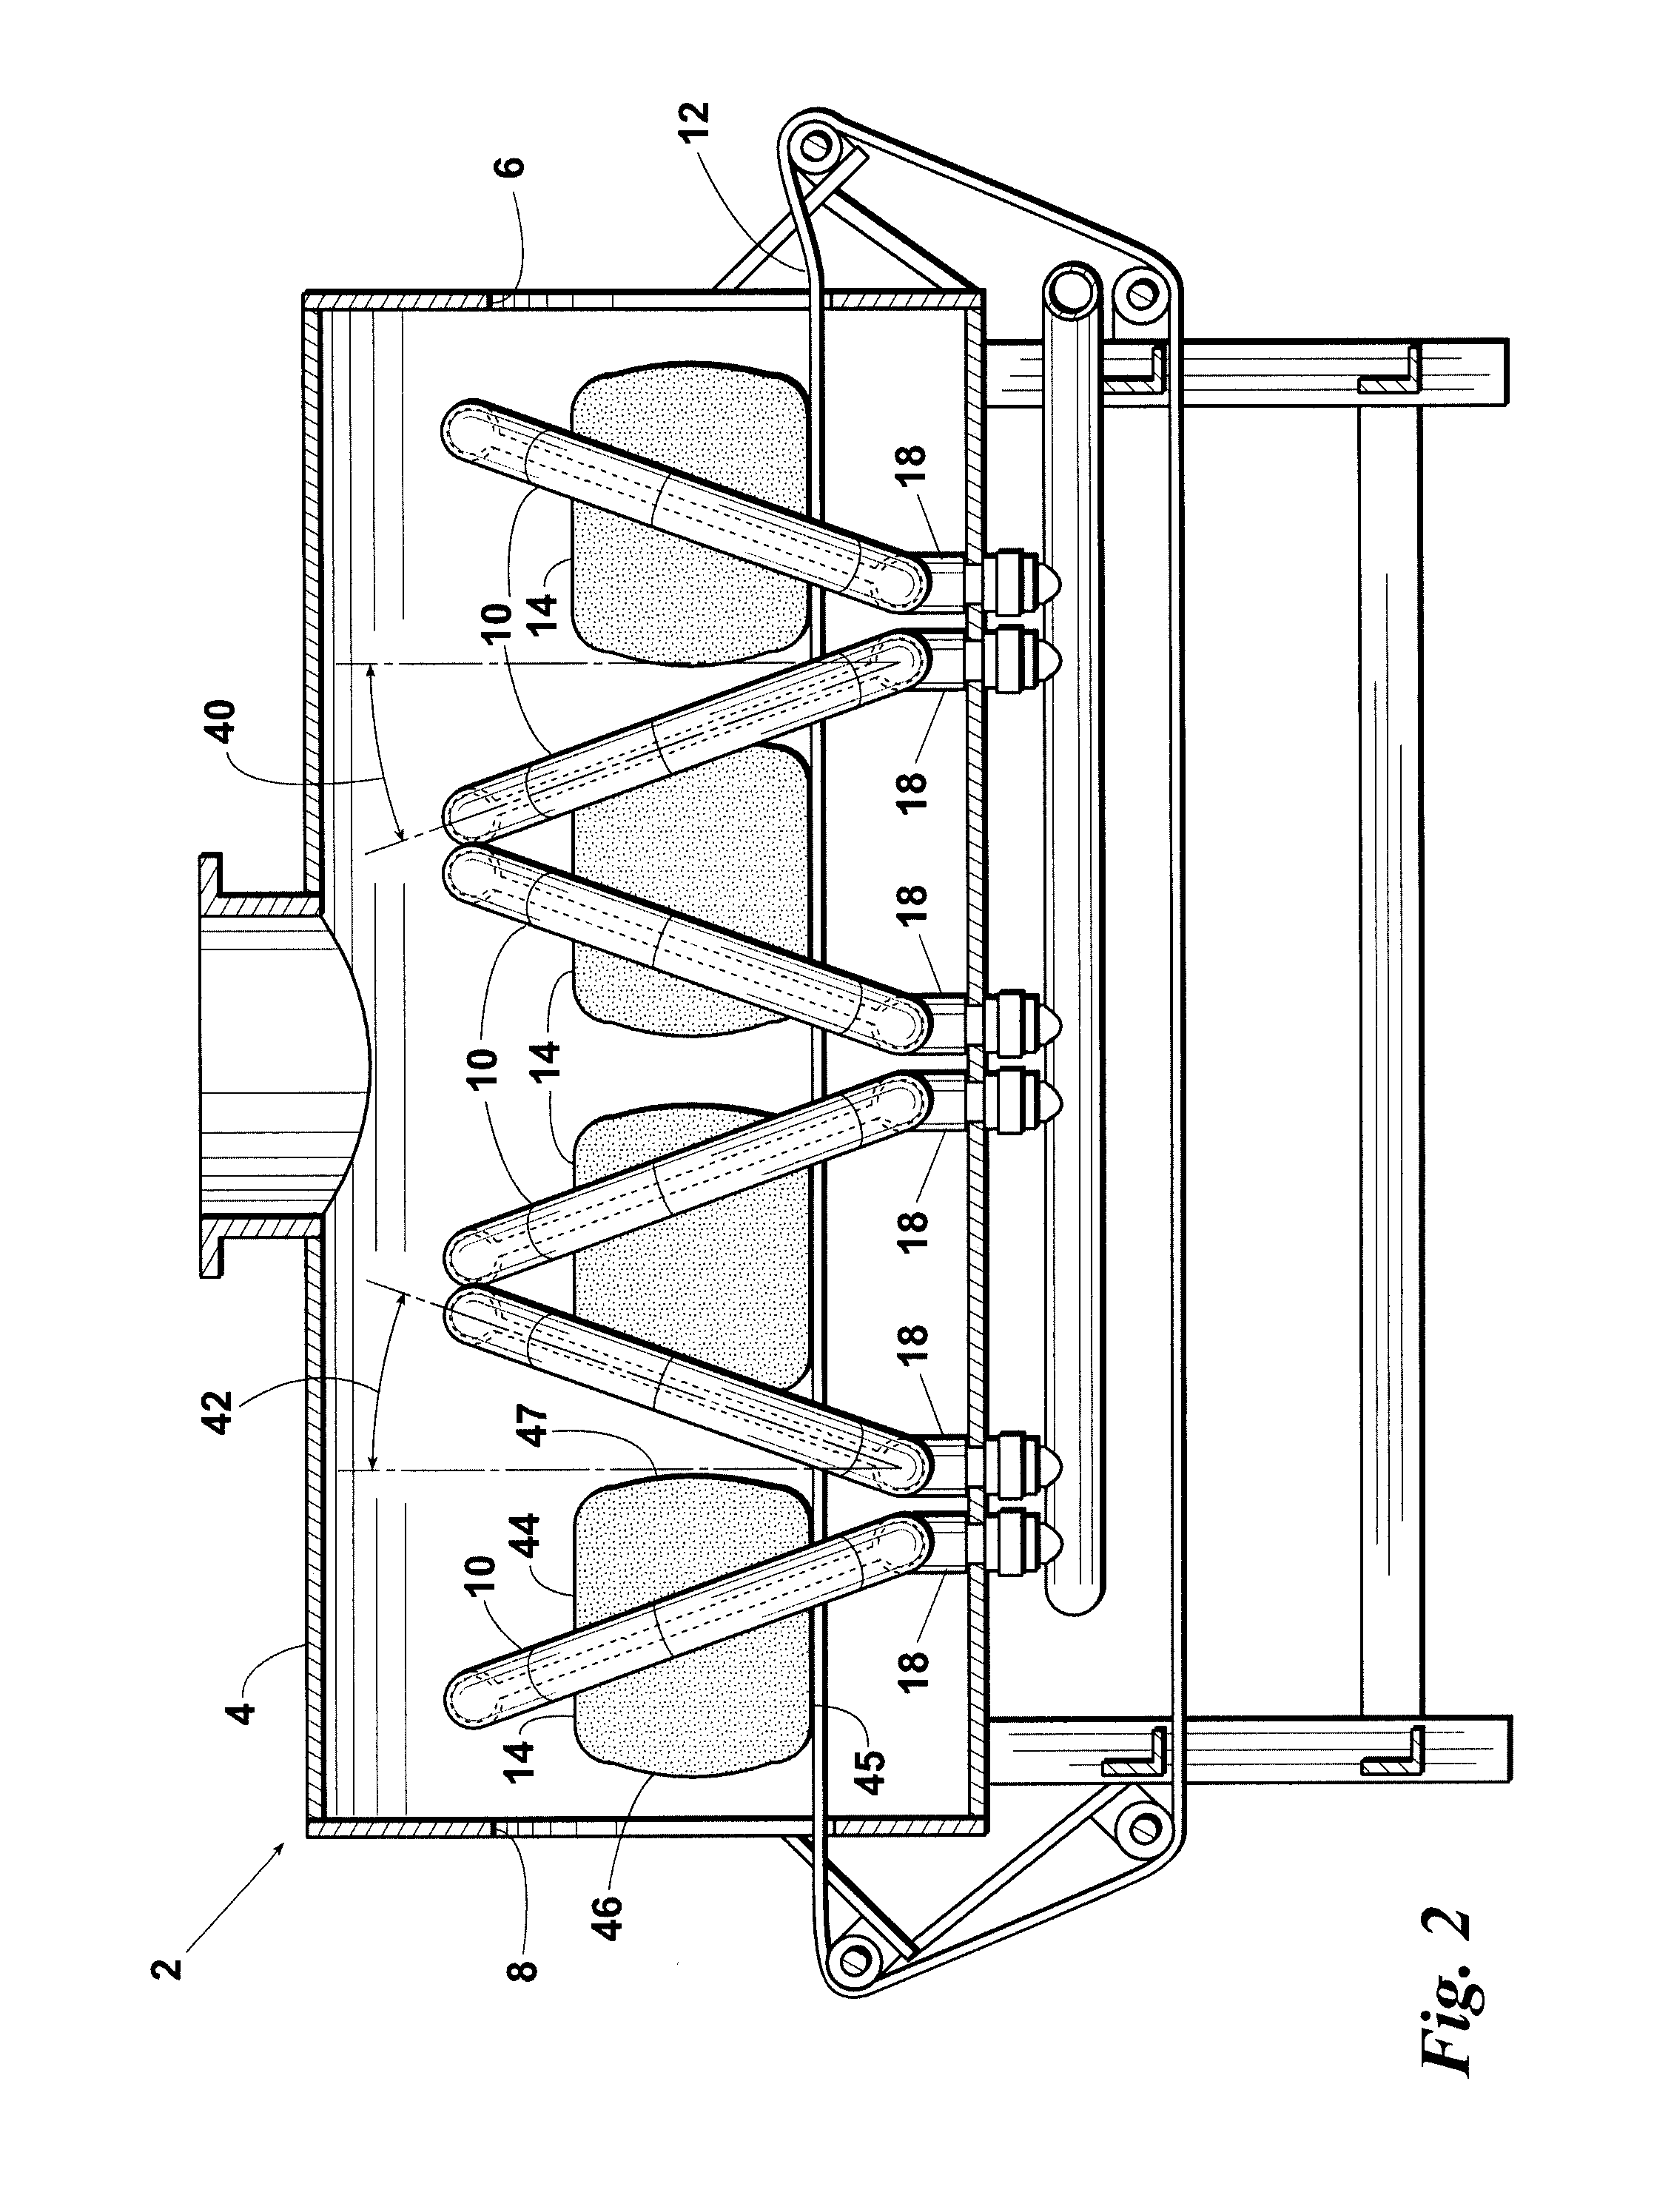 Method, continuous apparatus, and burner for producing a surface-roasted product